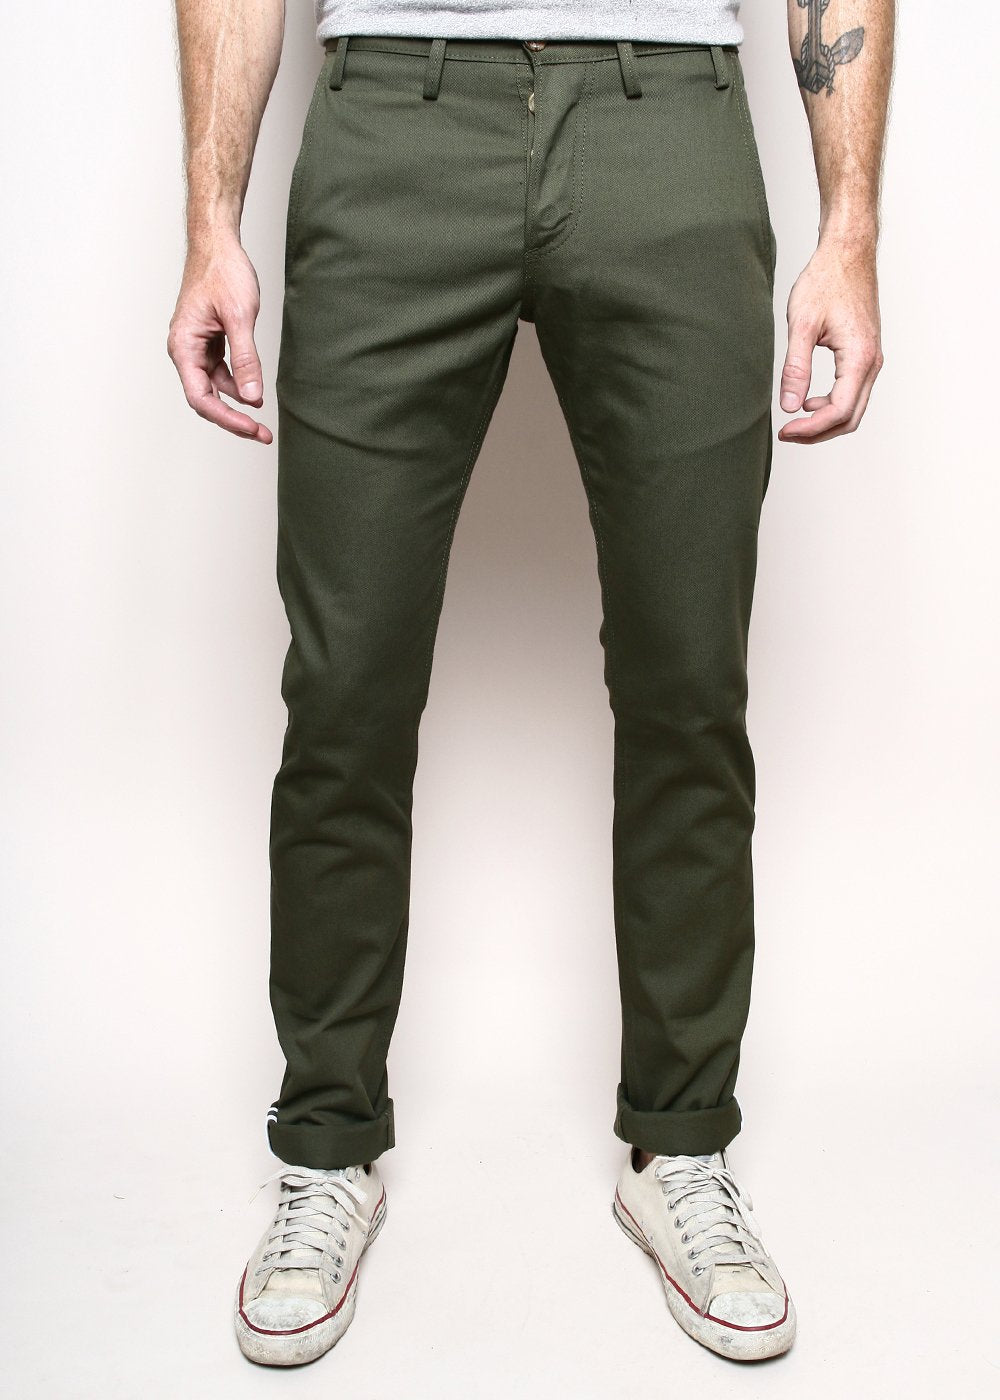 Rogue Territory Officer Trousers in Olive